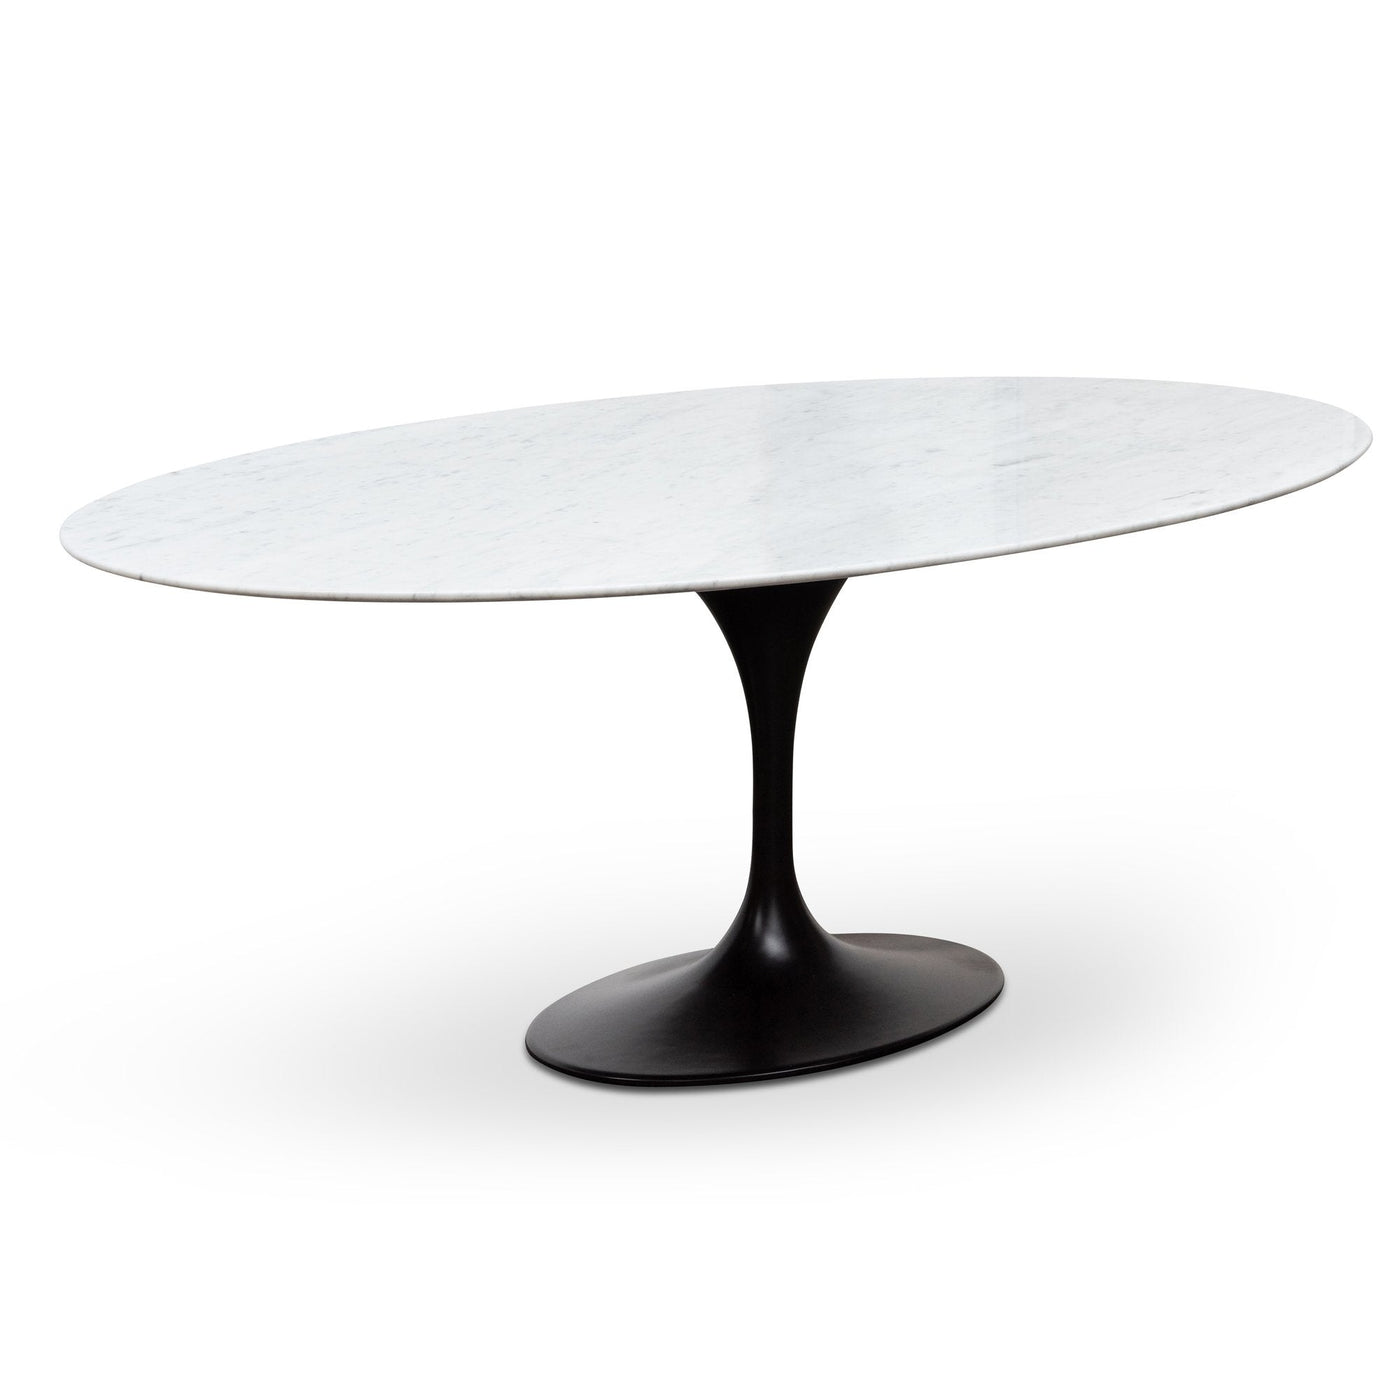 Oval 2m Marble Dining Table - Black Base